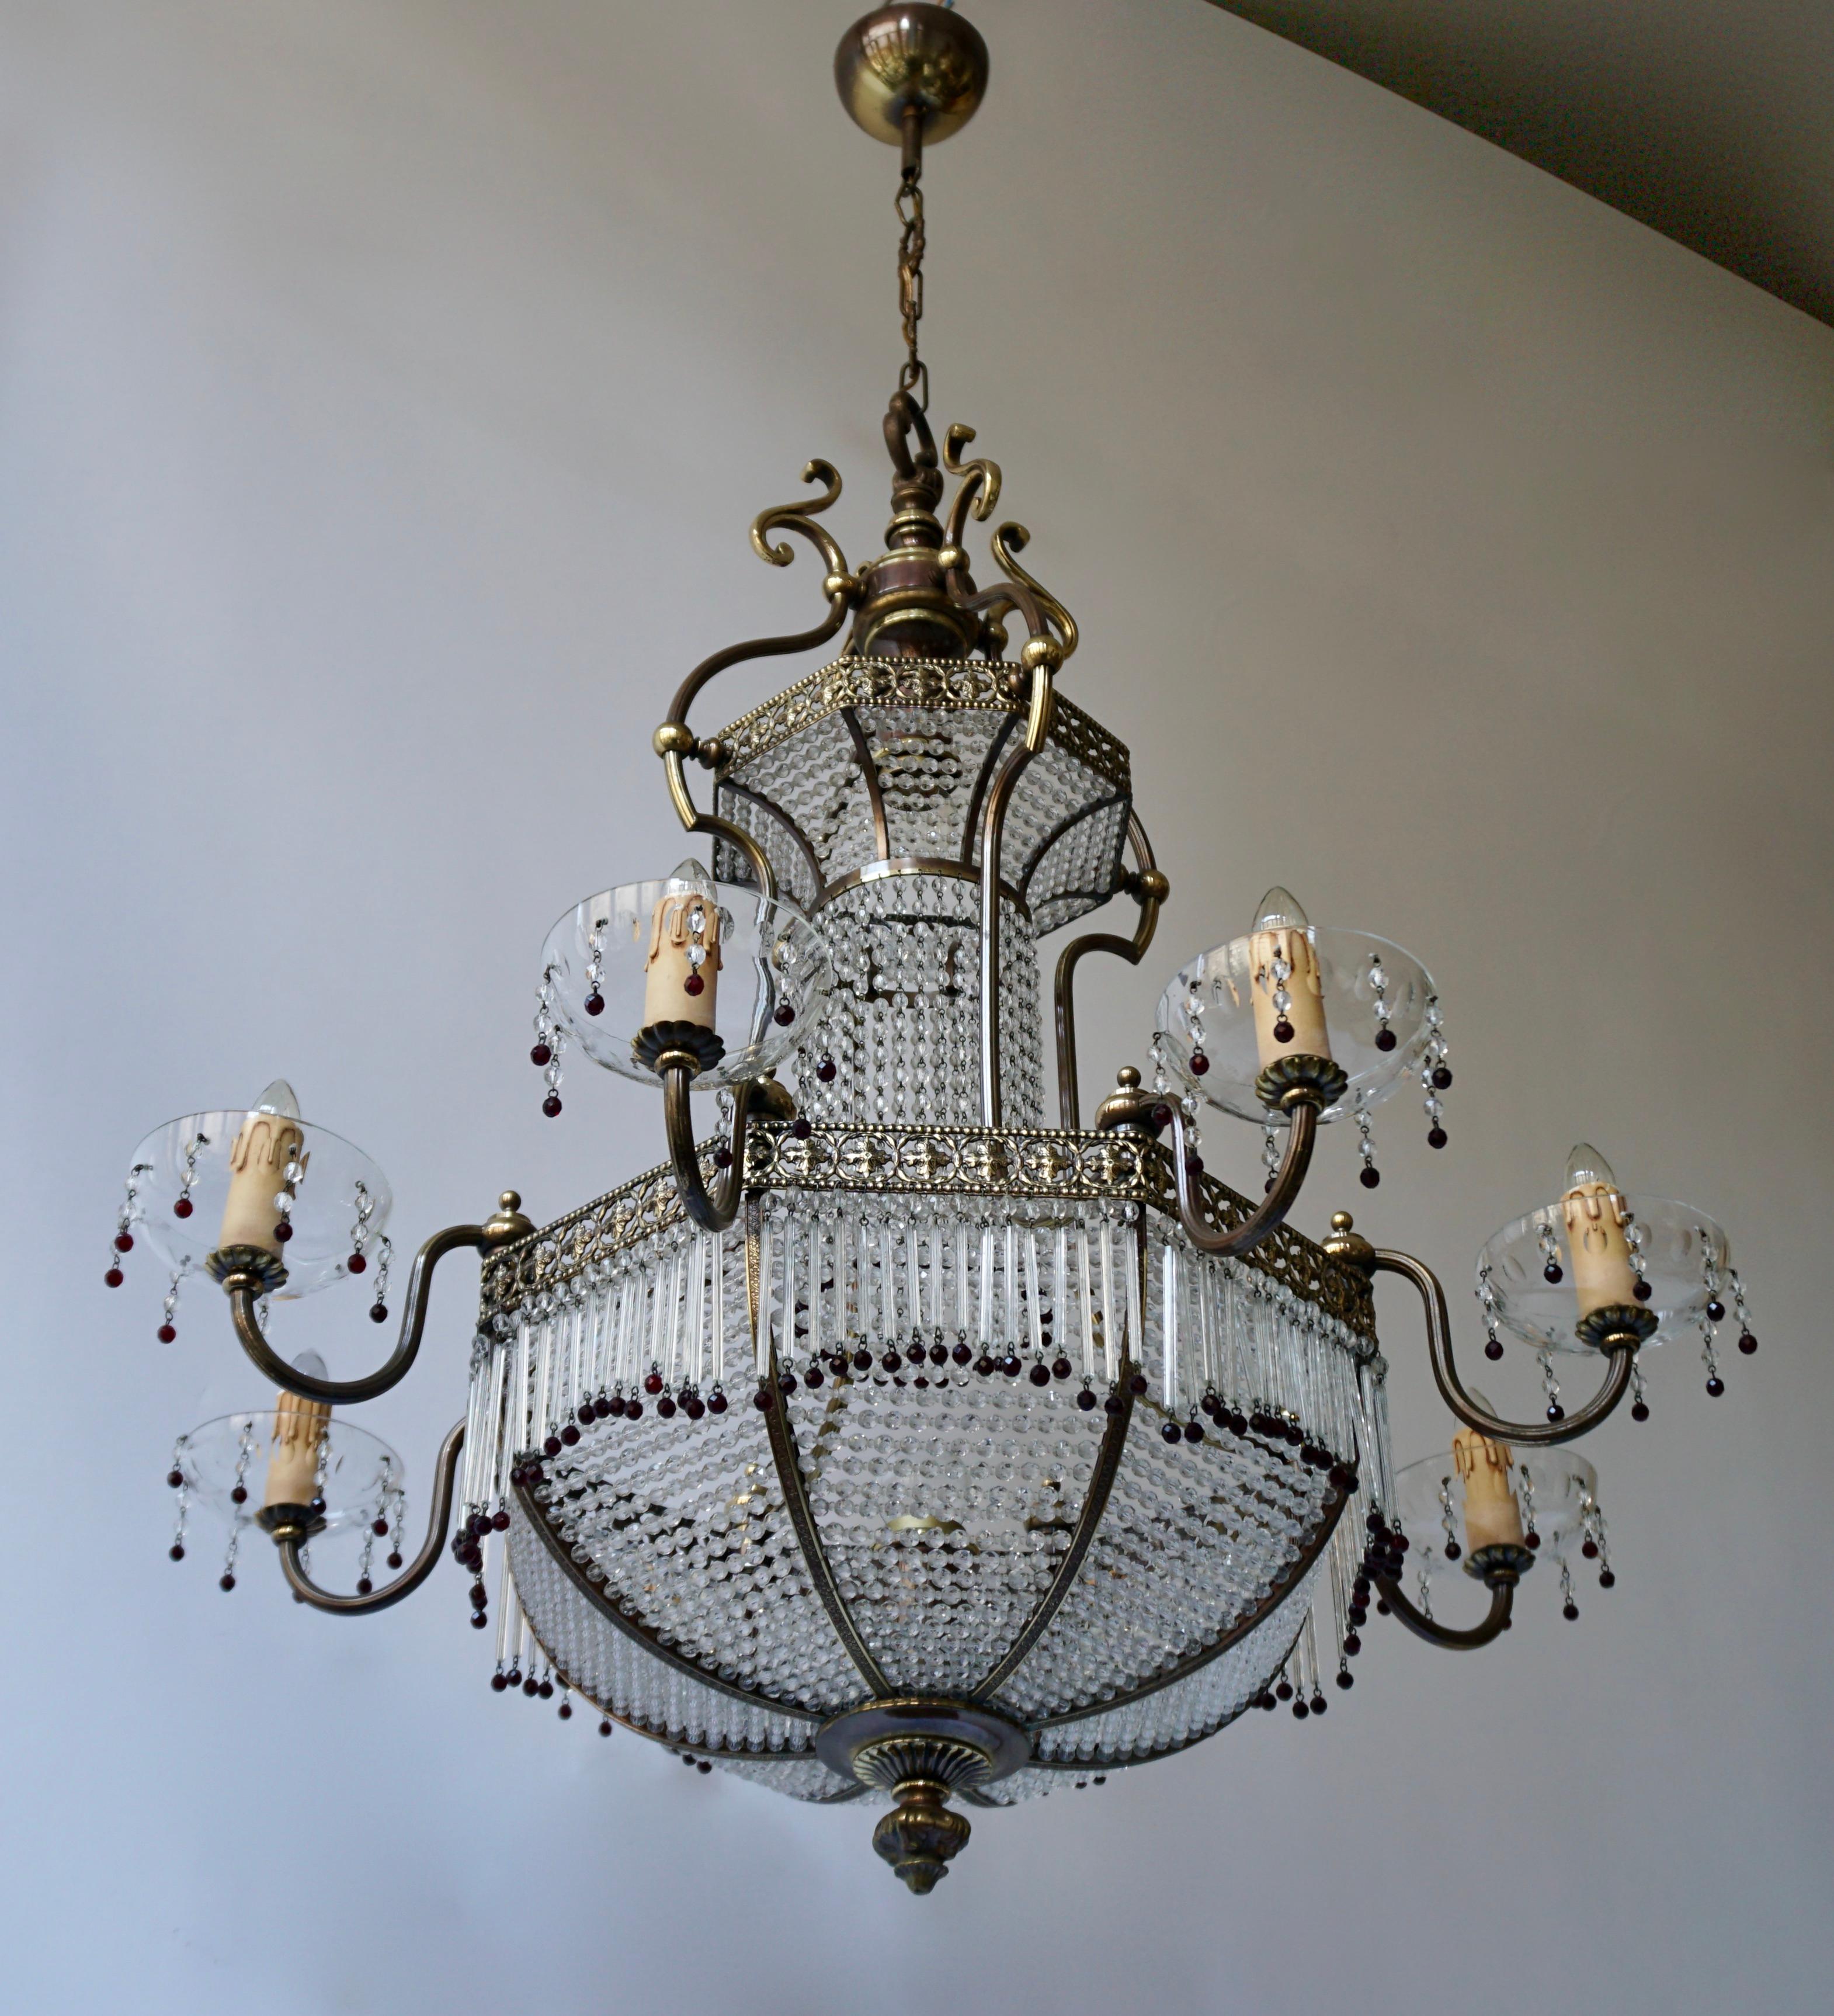 This beautiful French sac a perles chandelier has a copper wire mesh frame that is hung with hundreds of small glasses. The luster was made in Southern France circa 1950 and is in good condition. It has eight arms with candles on the outside and 2